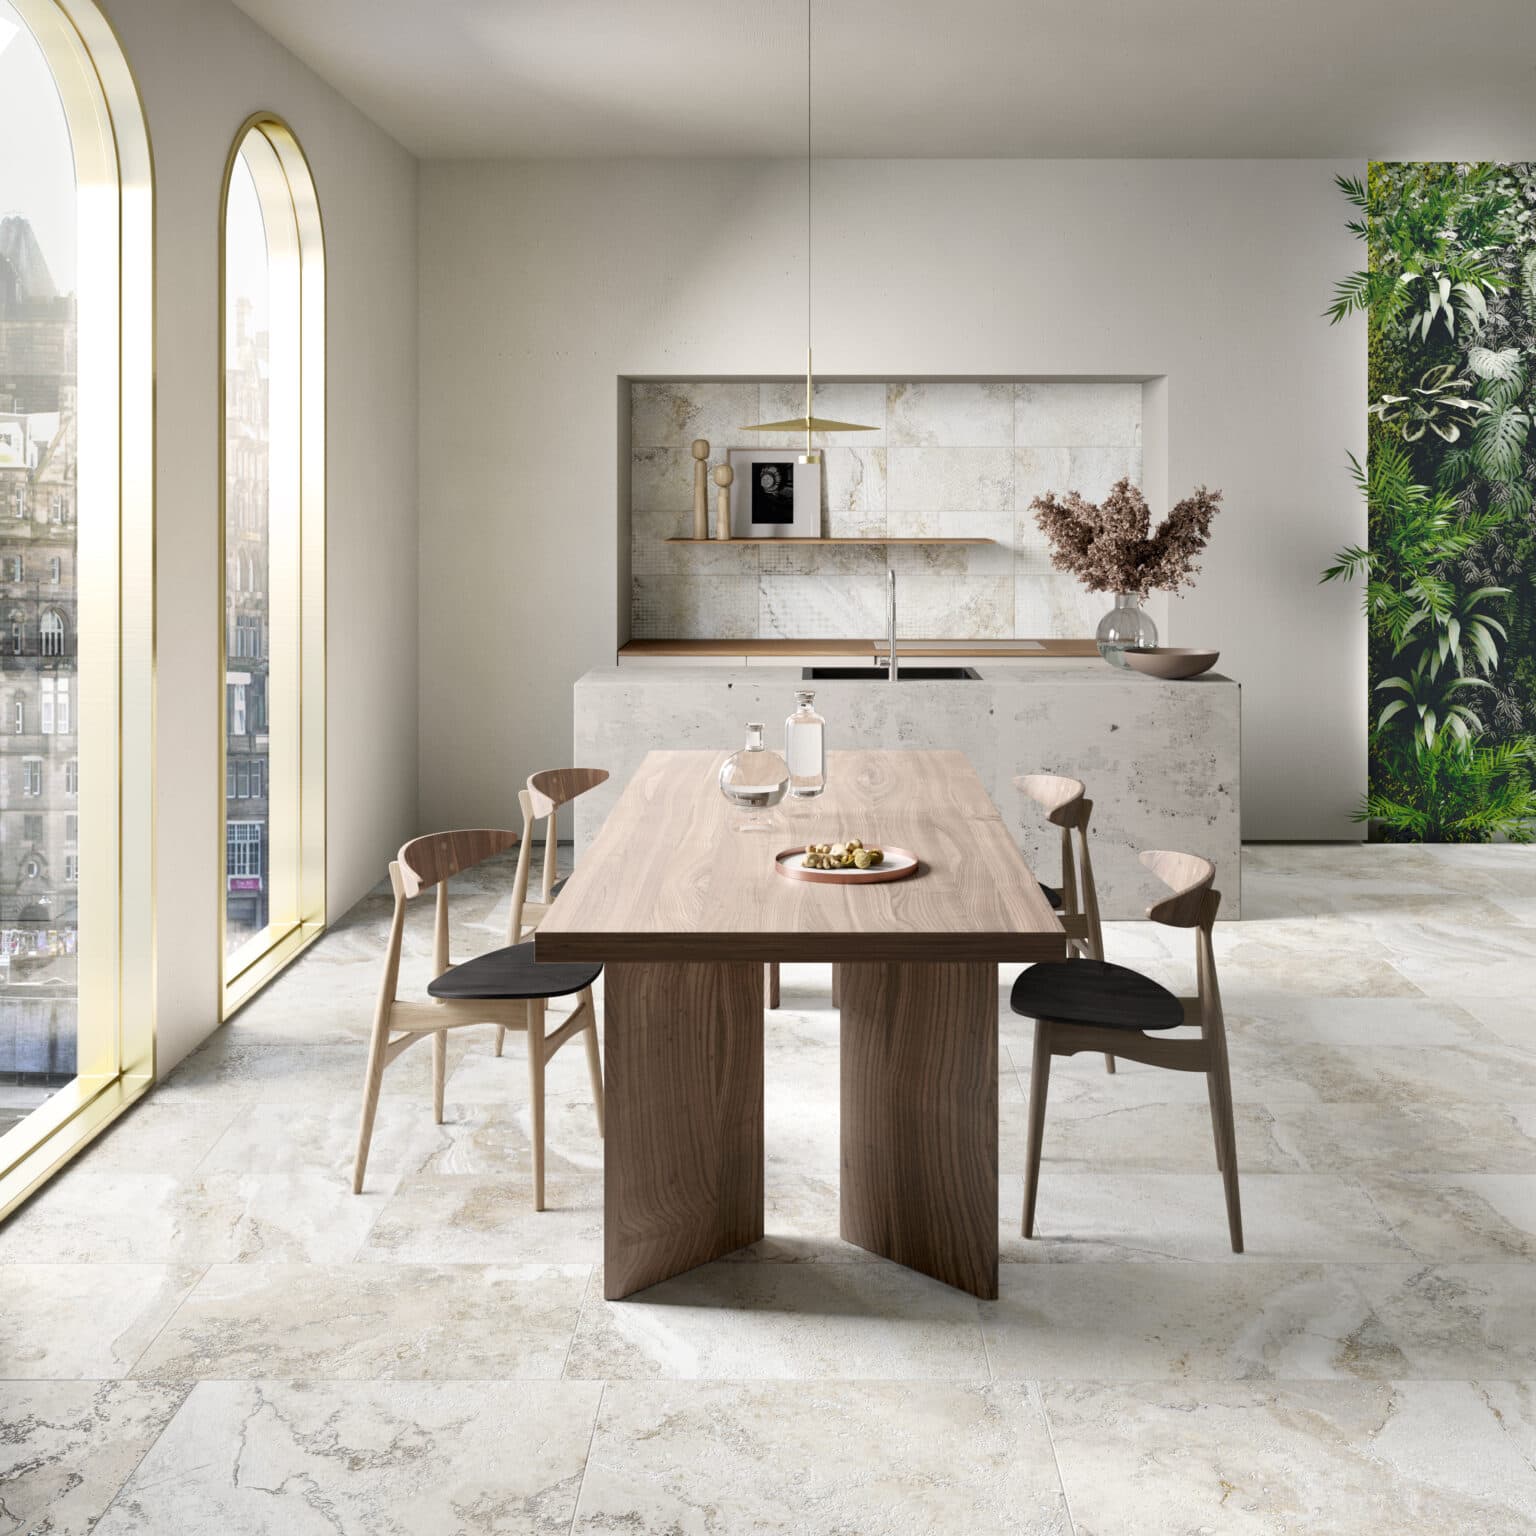 Porcelain Tile Natural Stone Look - BLOOM Collection-4221-a752-2ae14fad8c42